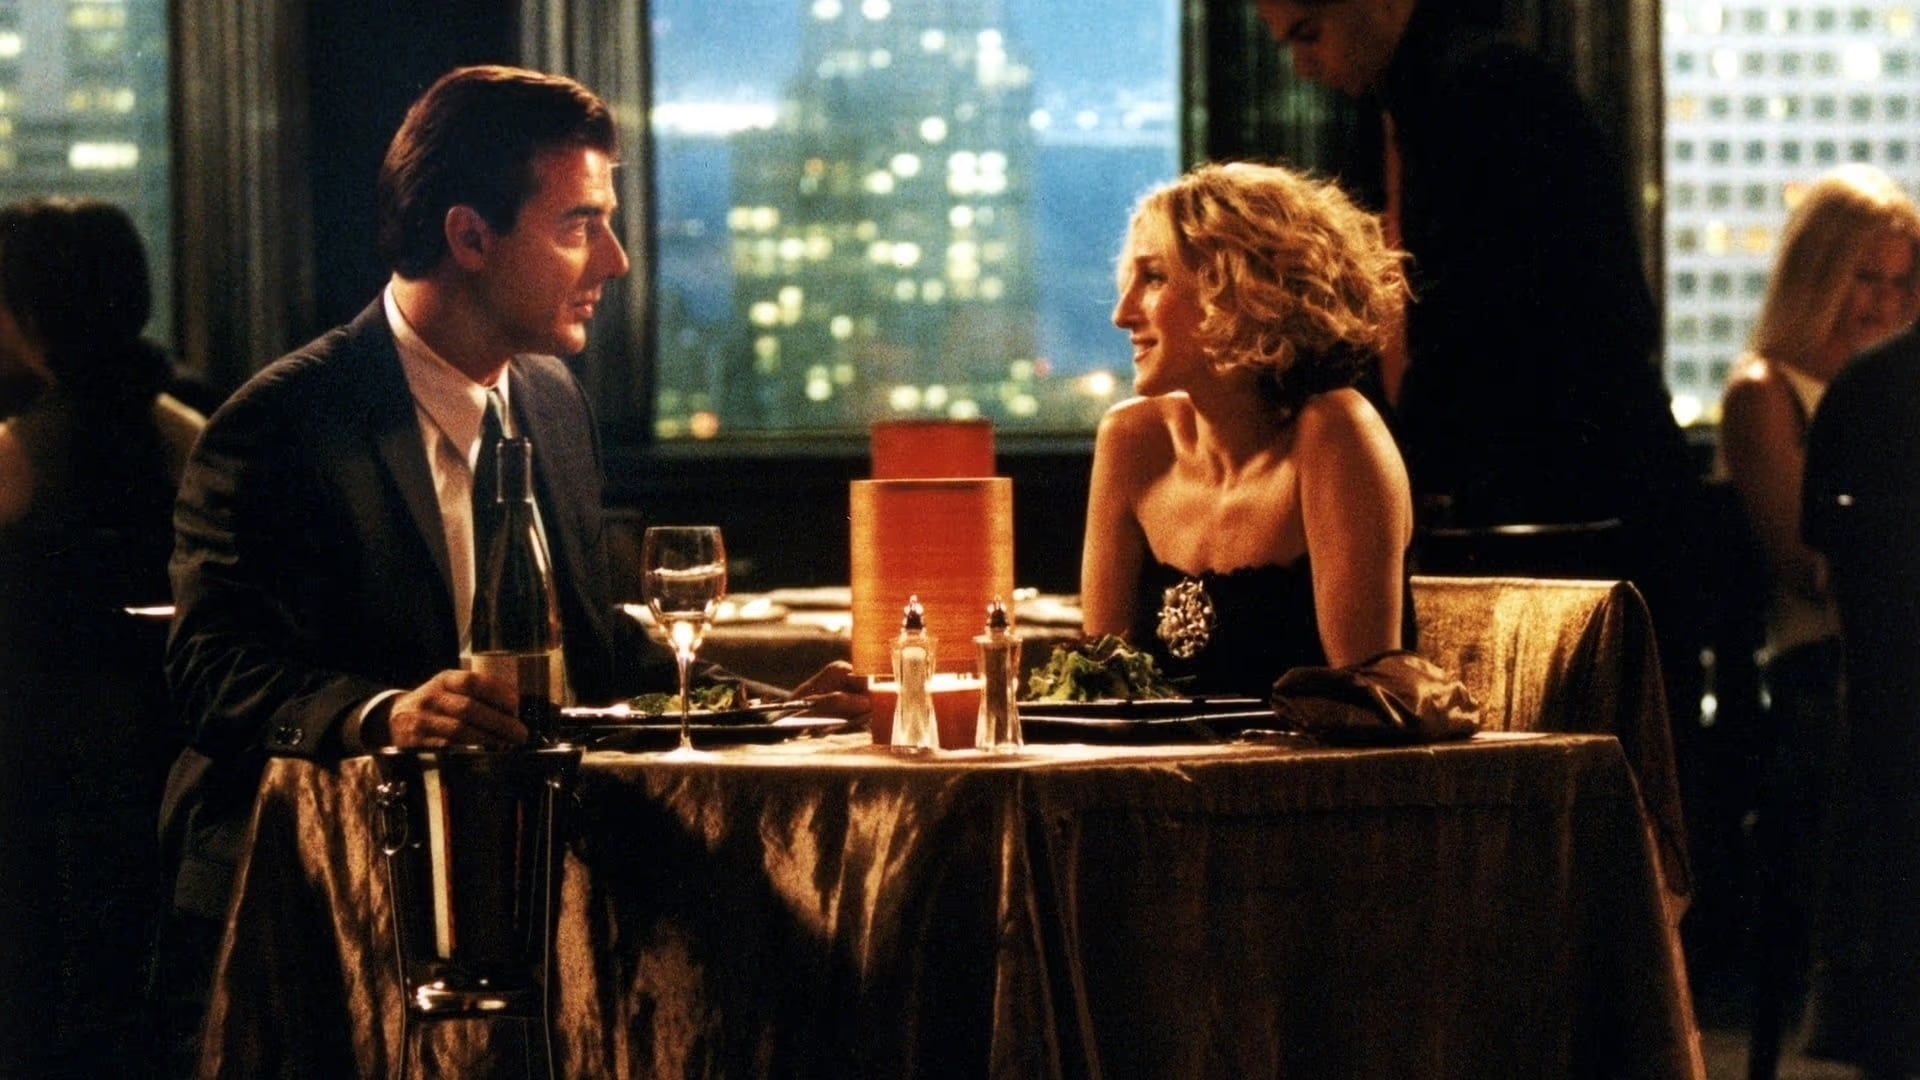 Dinner date with Big and Carrie, Sex and The City